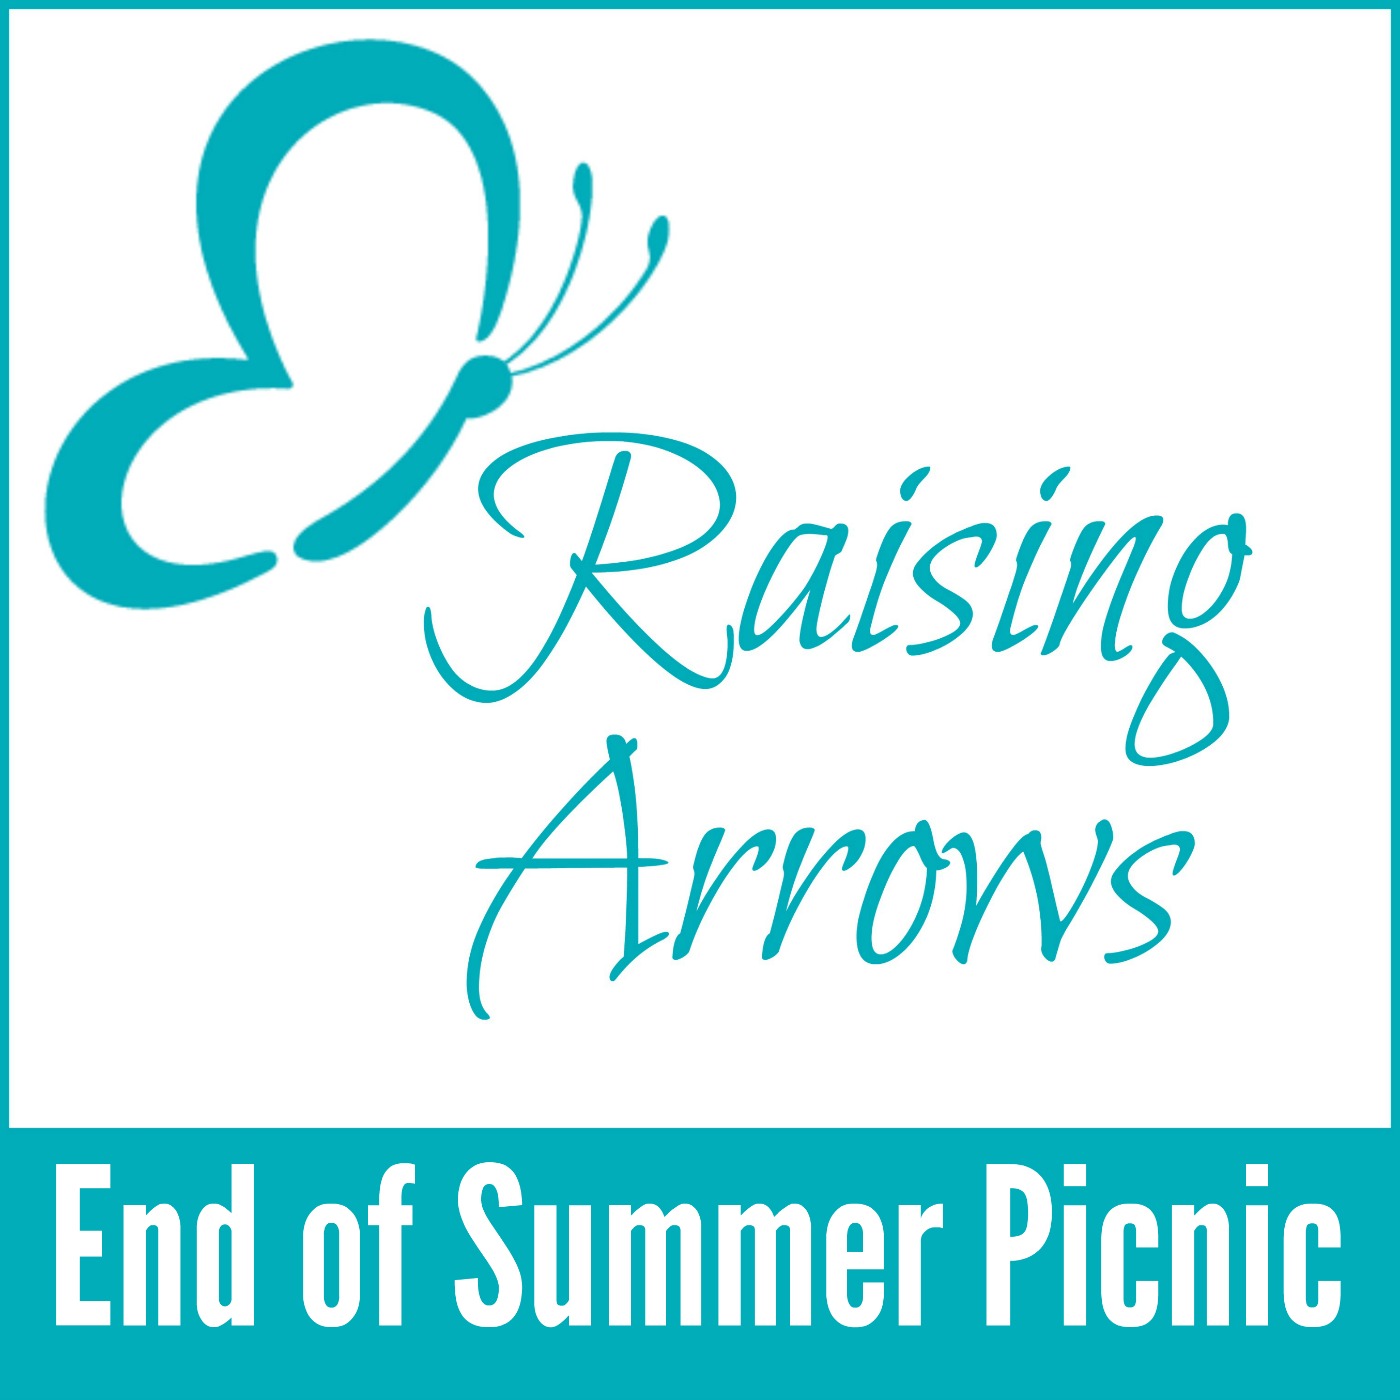 How to celebrate the changing of the seasons with an End of Summer Picnic!